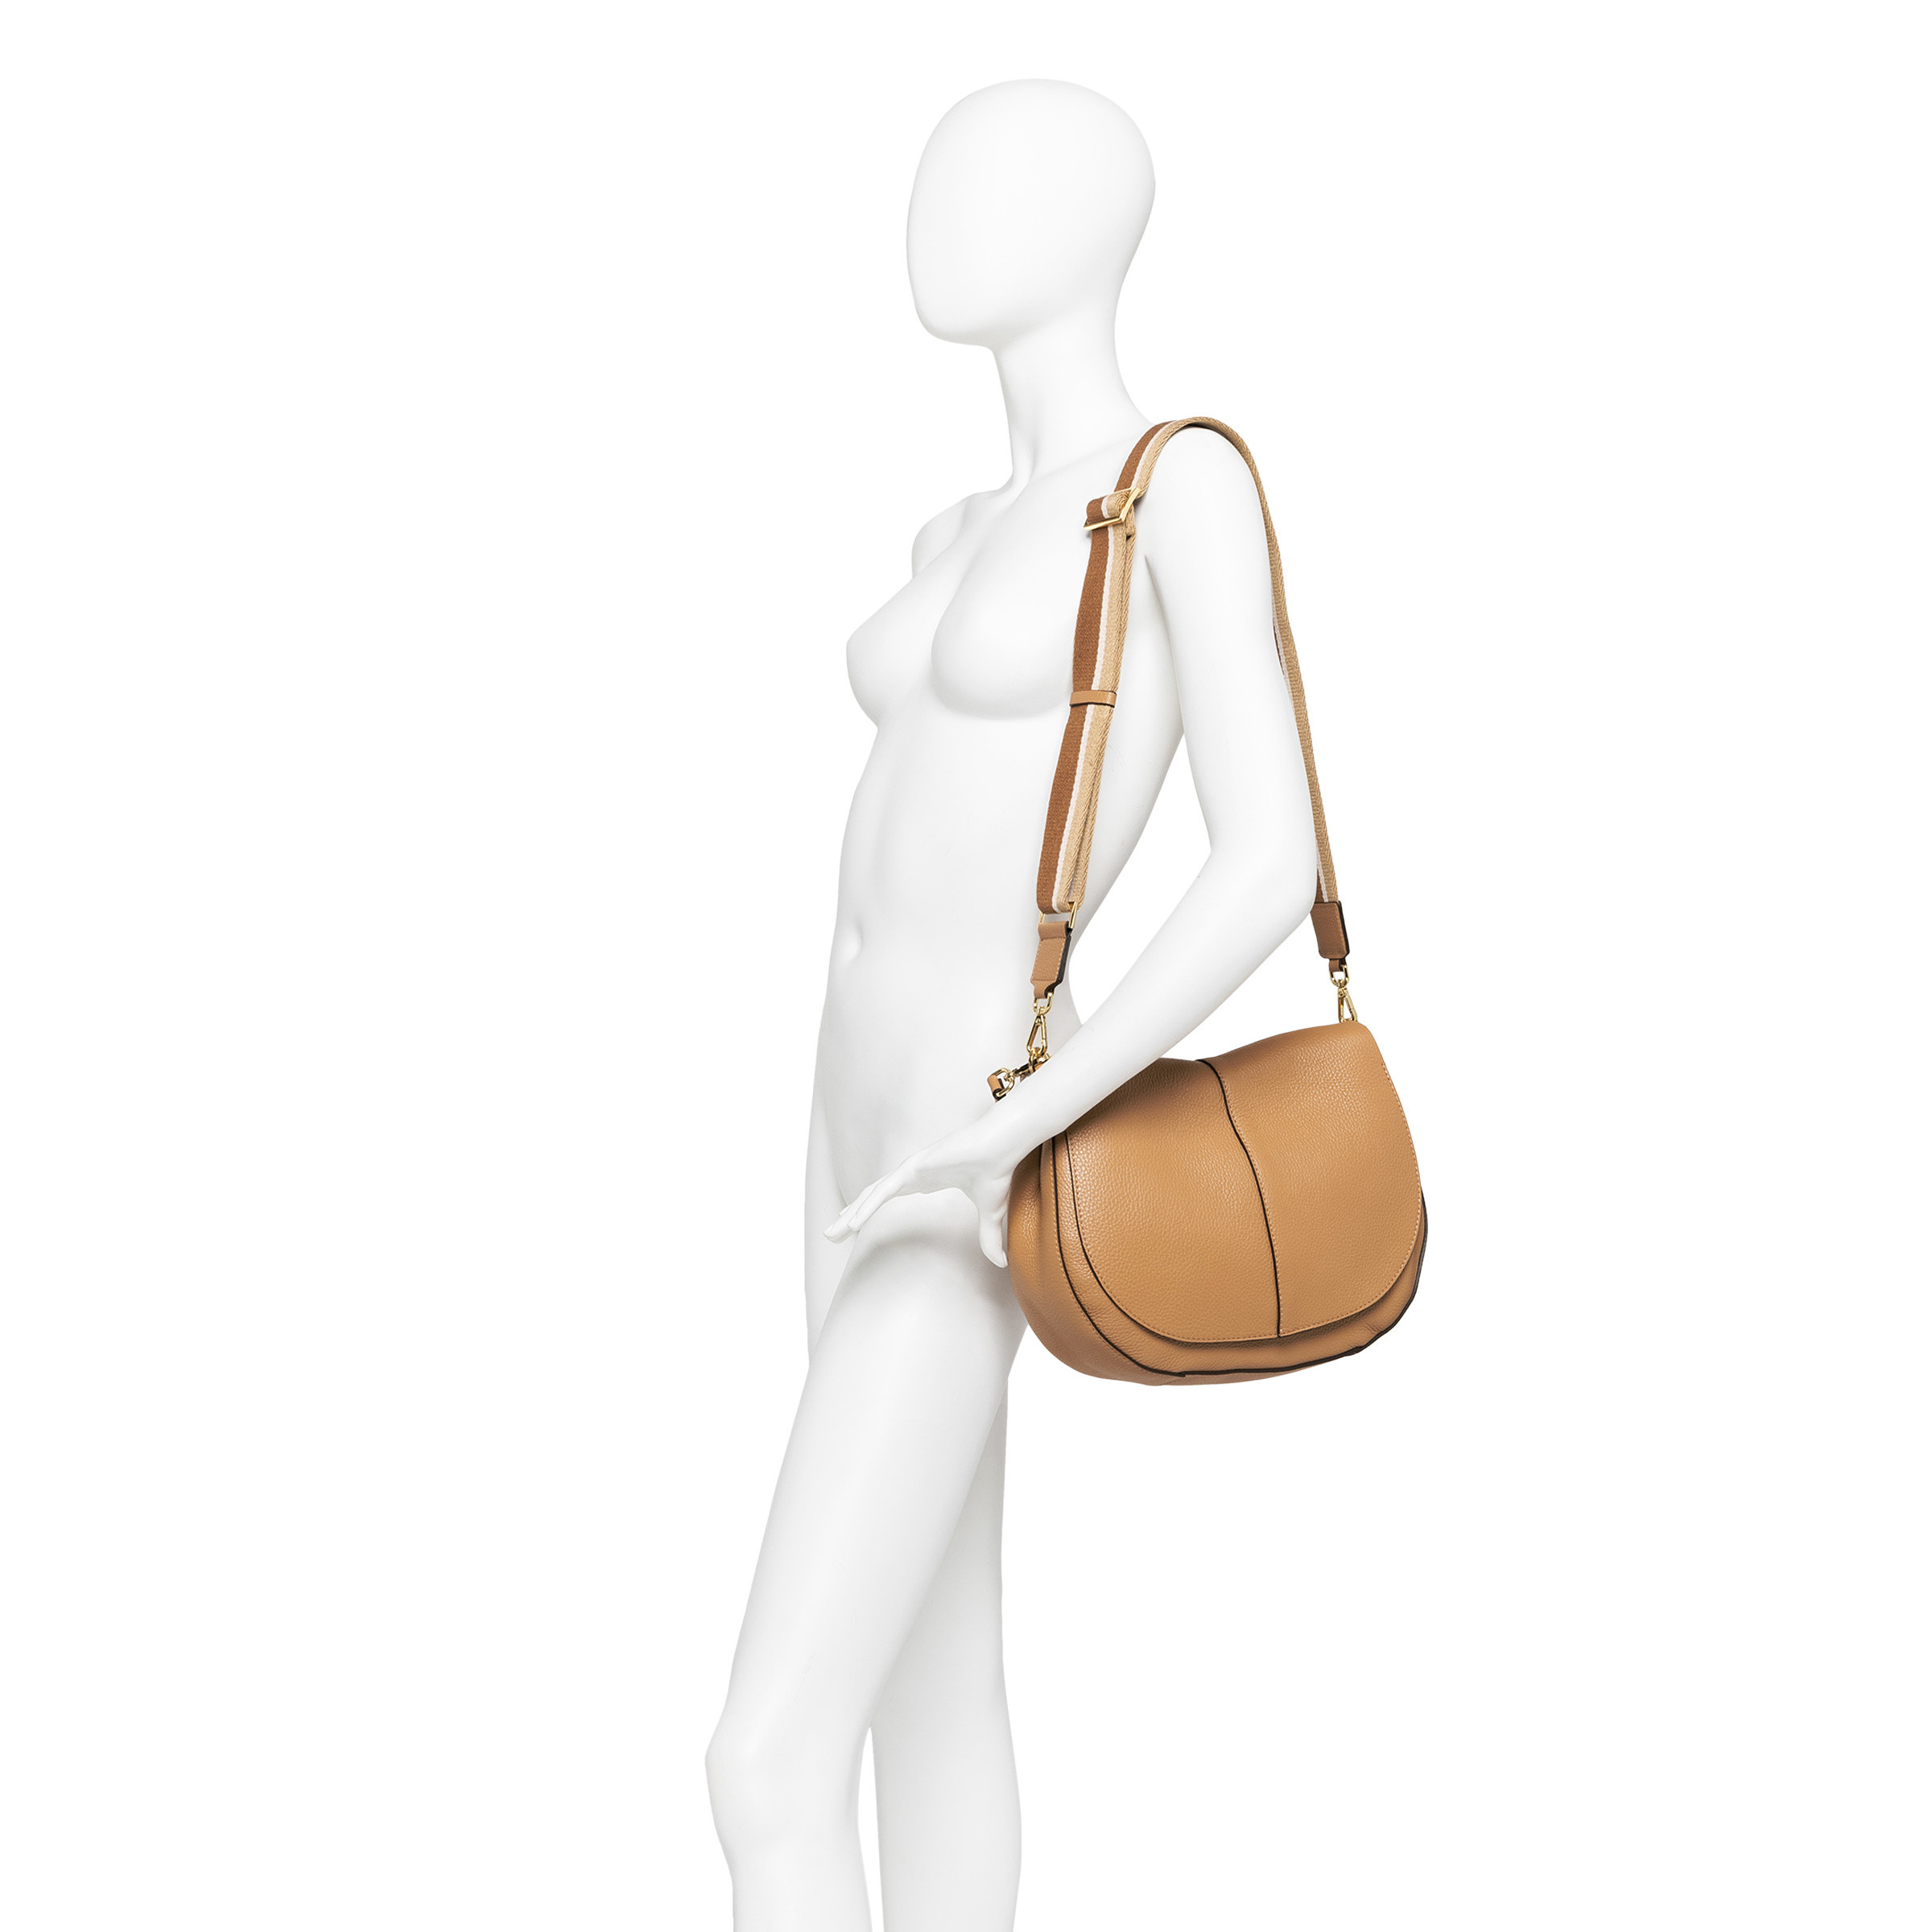 Gianni Chiarini - Helena Round bag in leather, Natural, large image number 5